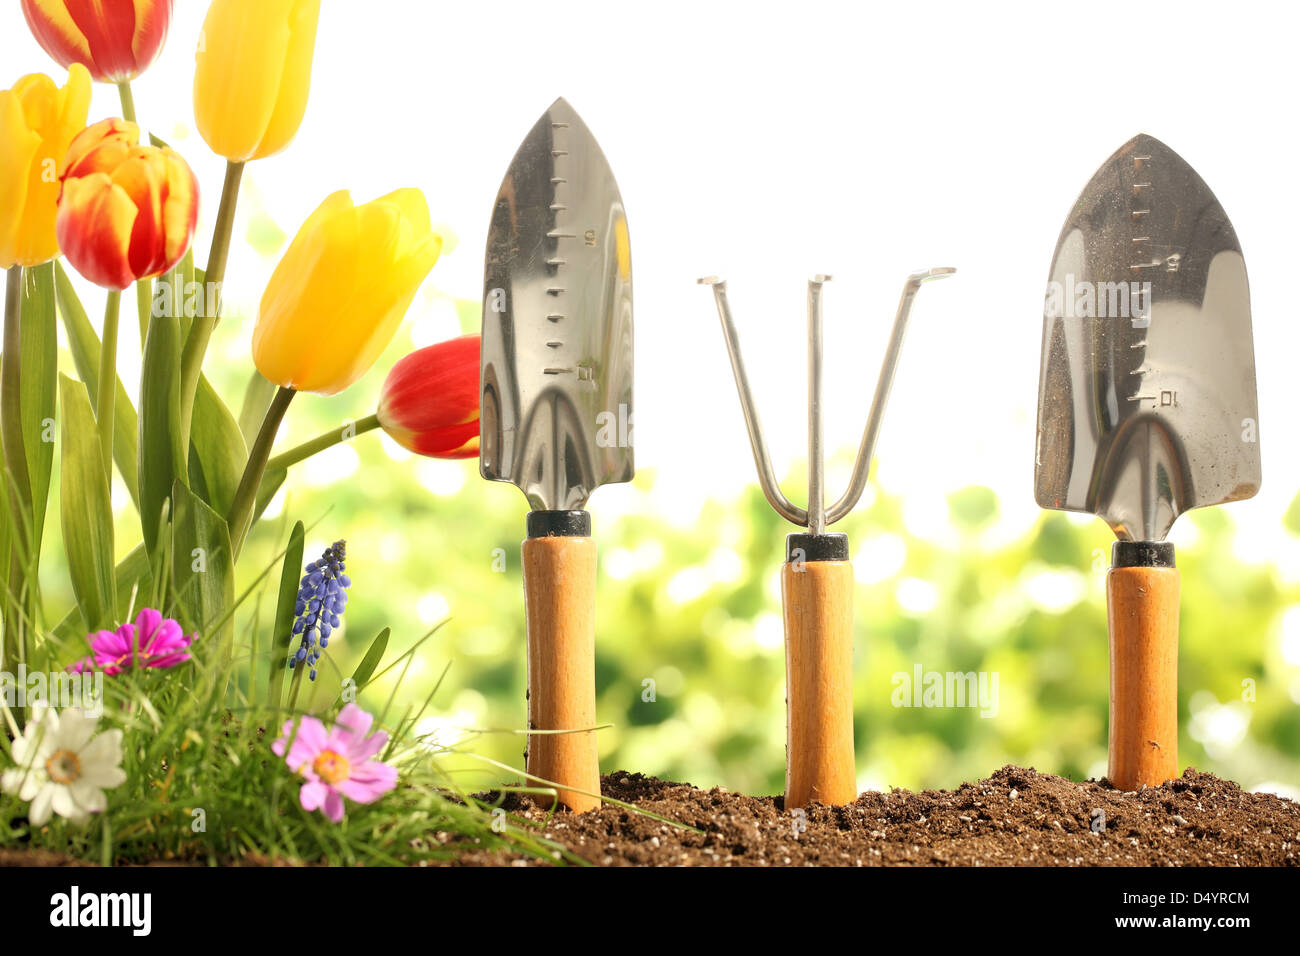 Garden tools,green grass and flowers Stock Photo